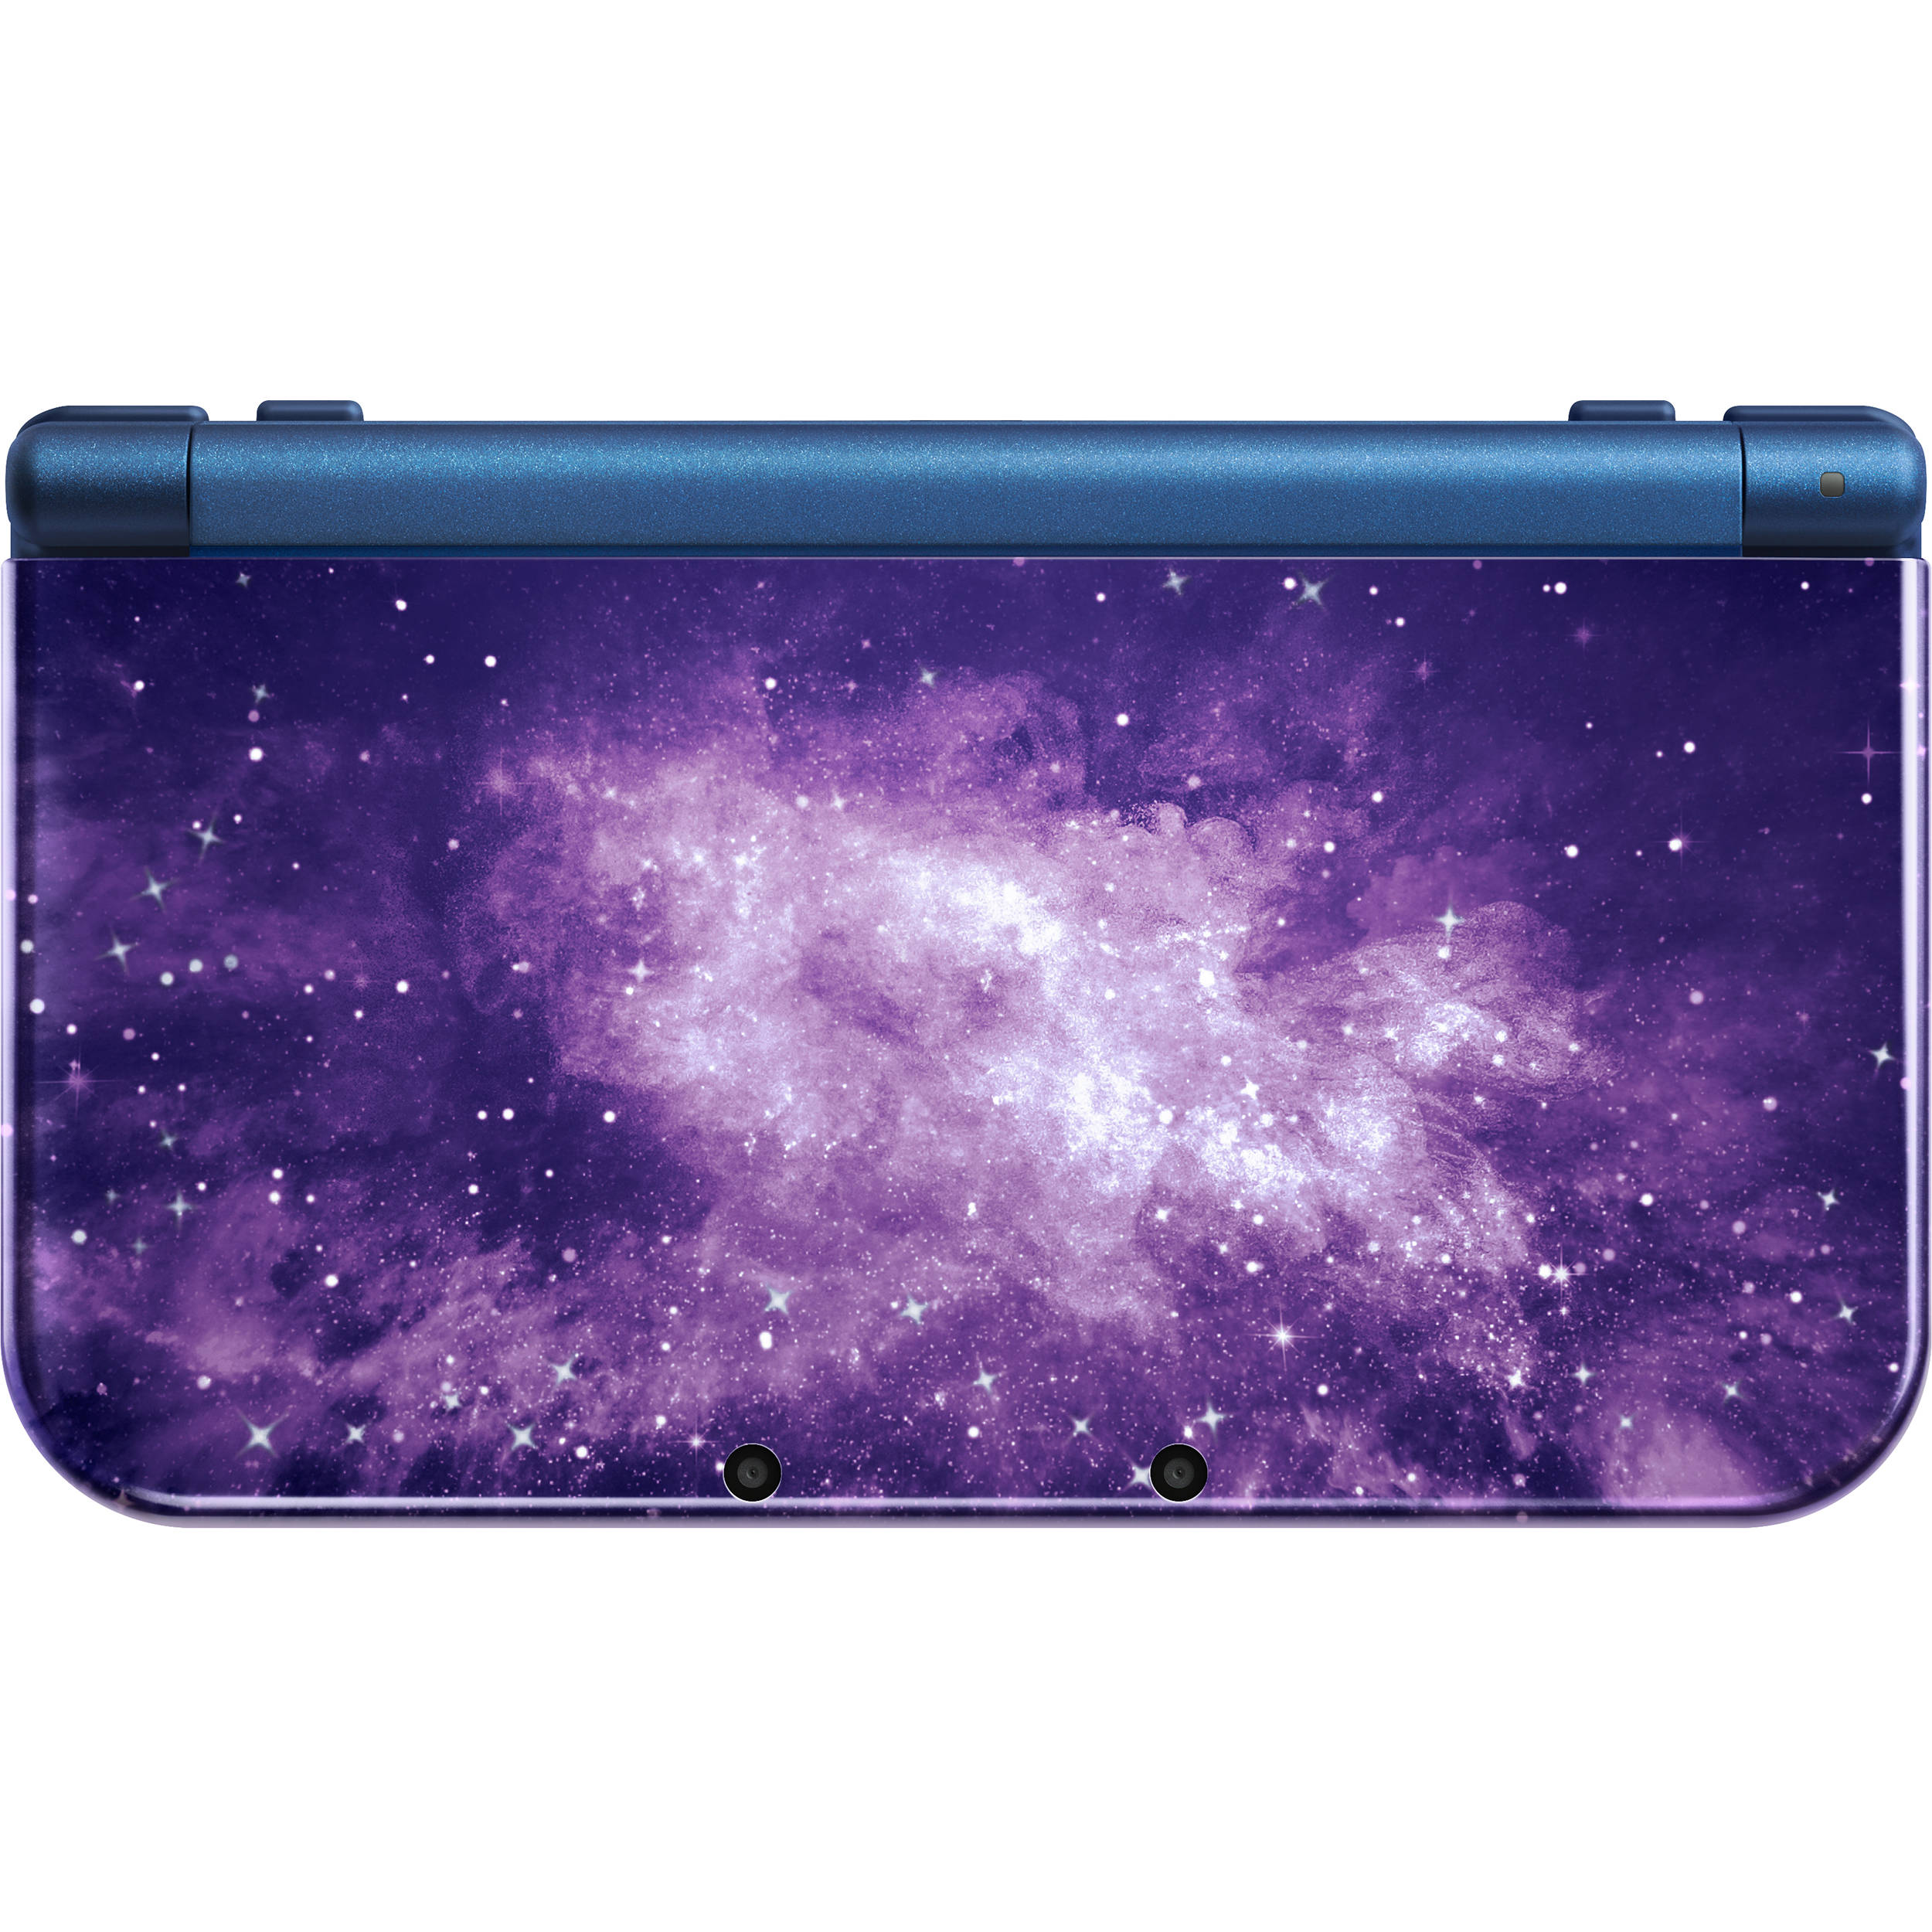 Nintendo 3ds Xl Handheld Gaming System 2015 Version Galaxy Style